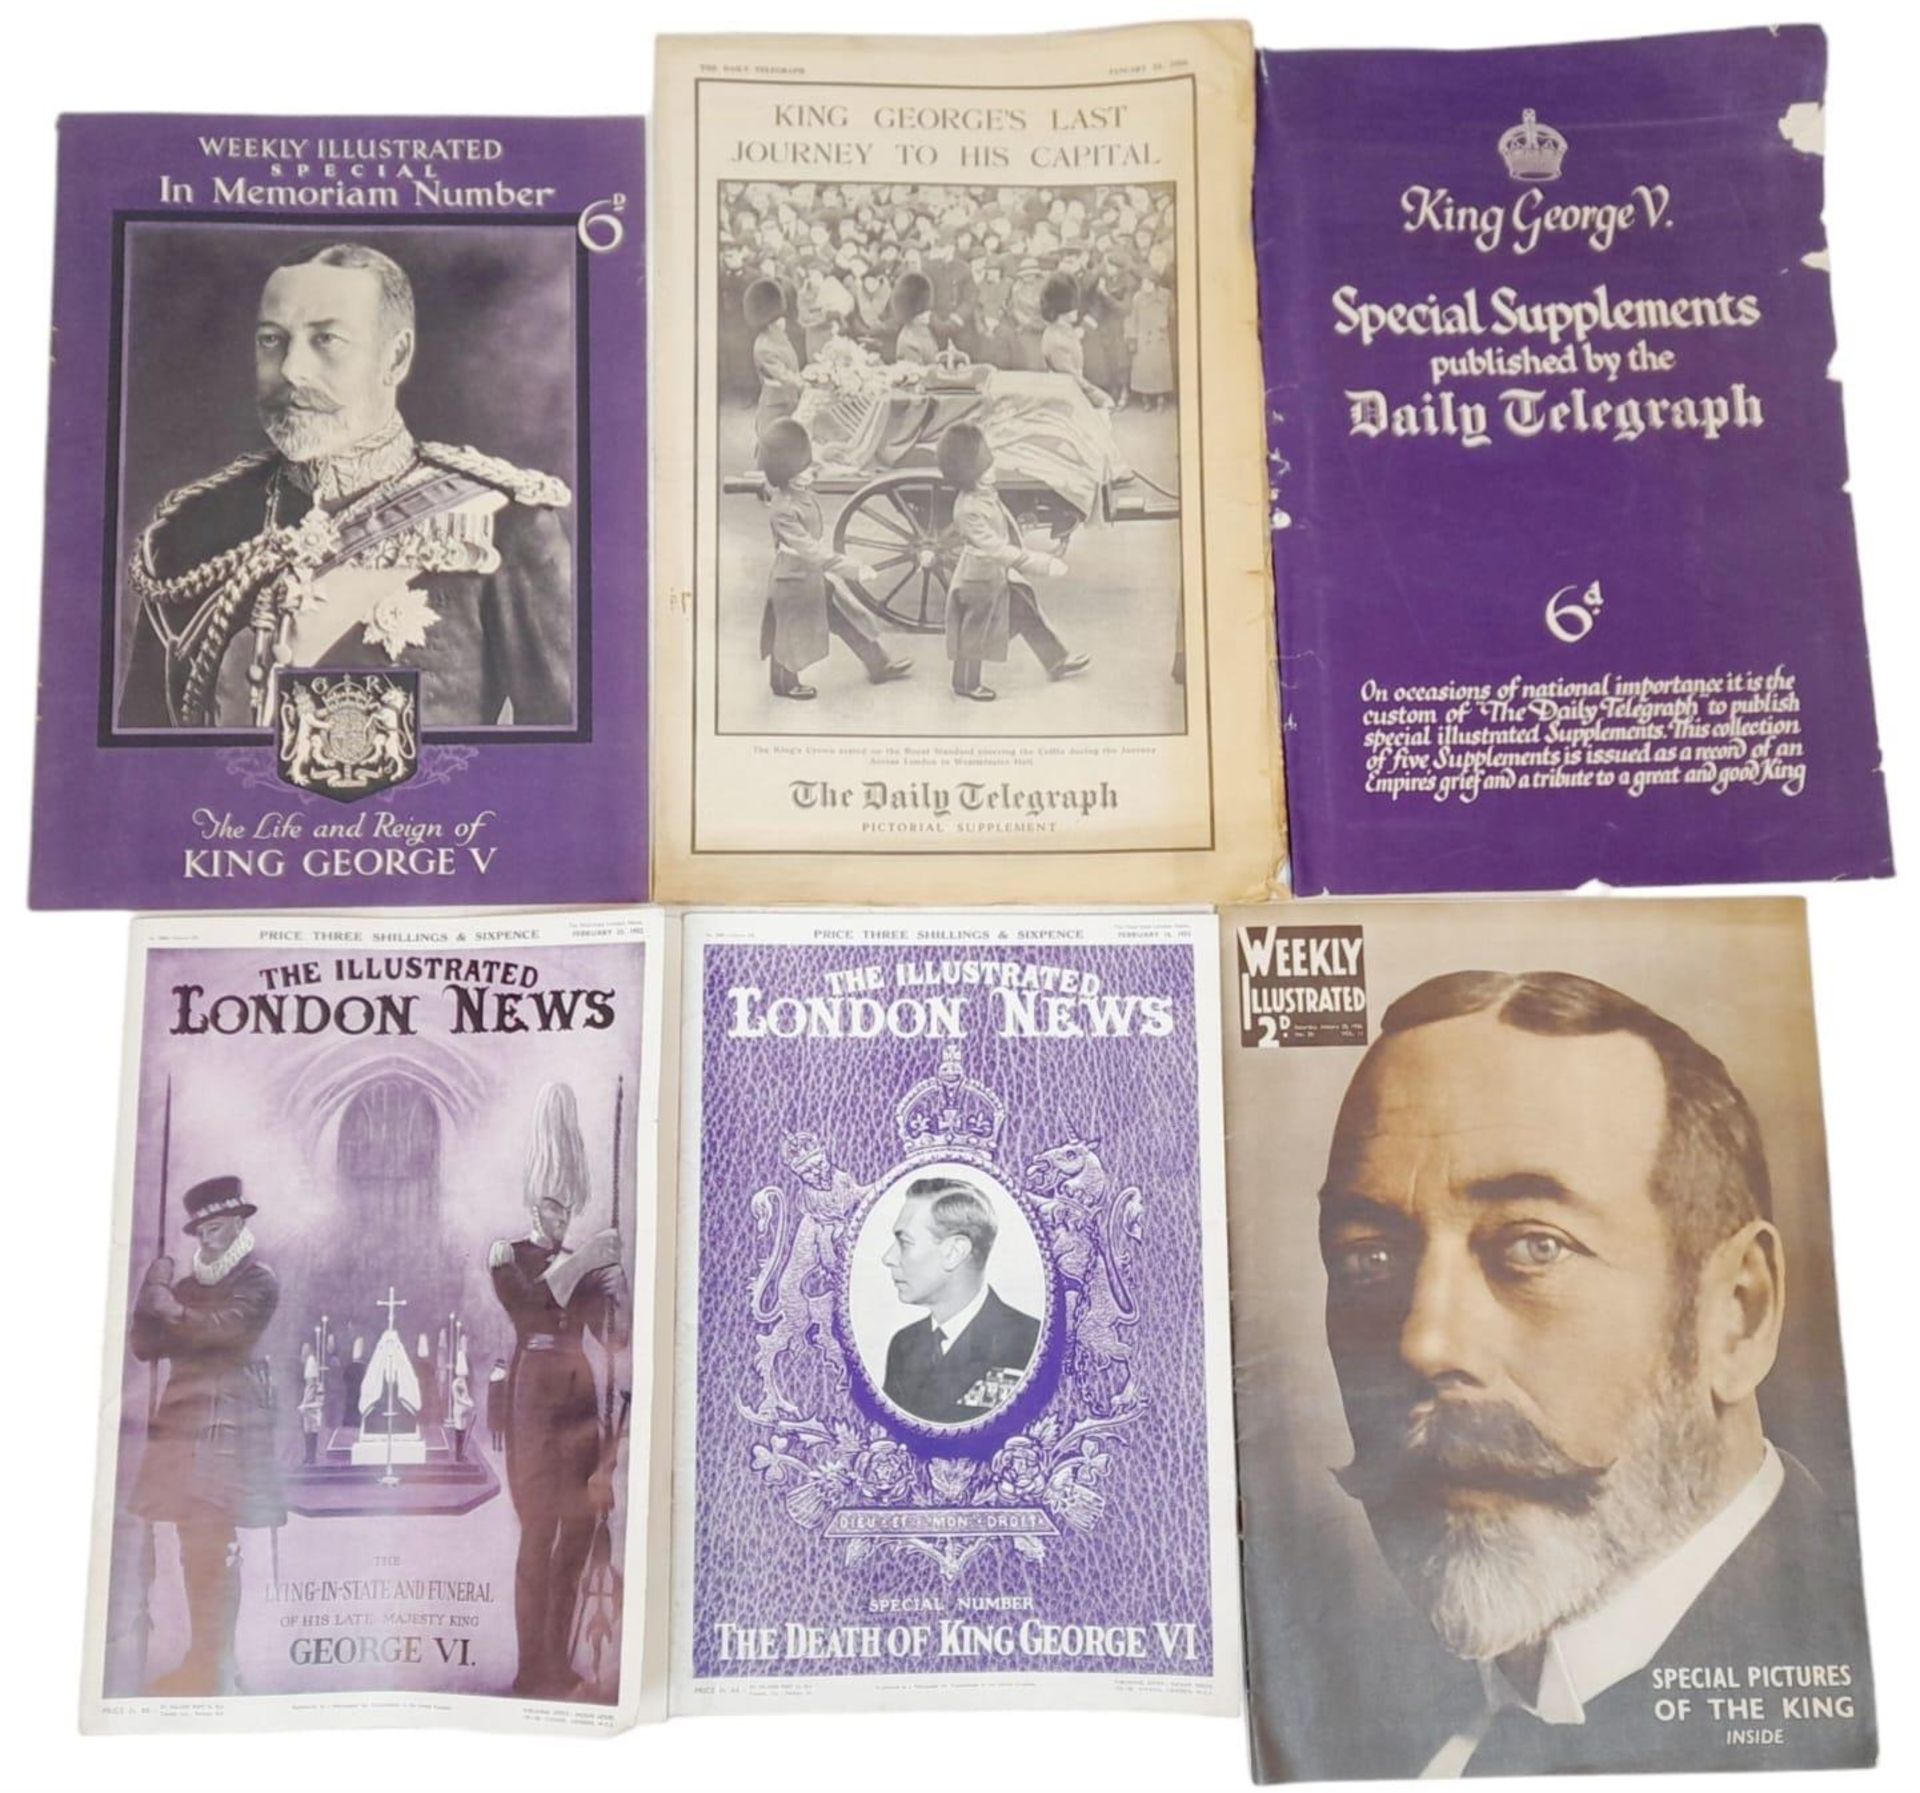 A Selection of Vintage copies of Newspapers and Magazines Marking the Deaths of King George V and